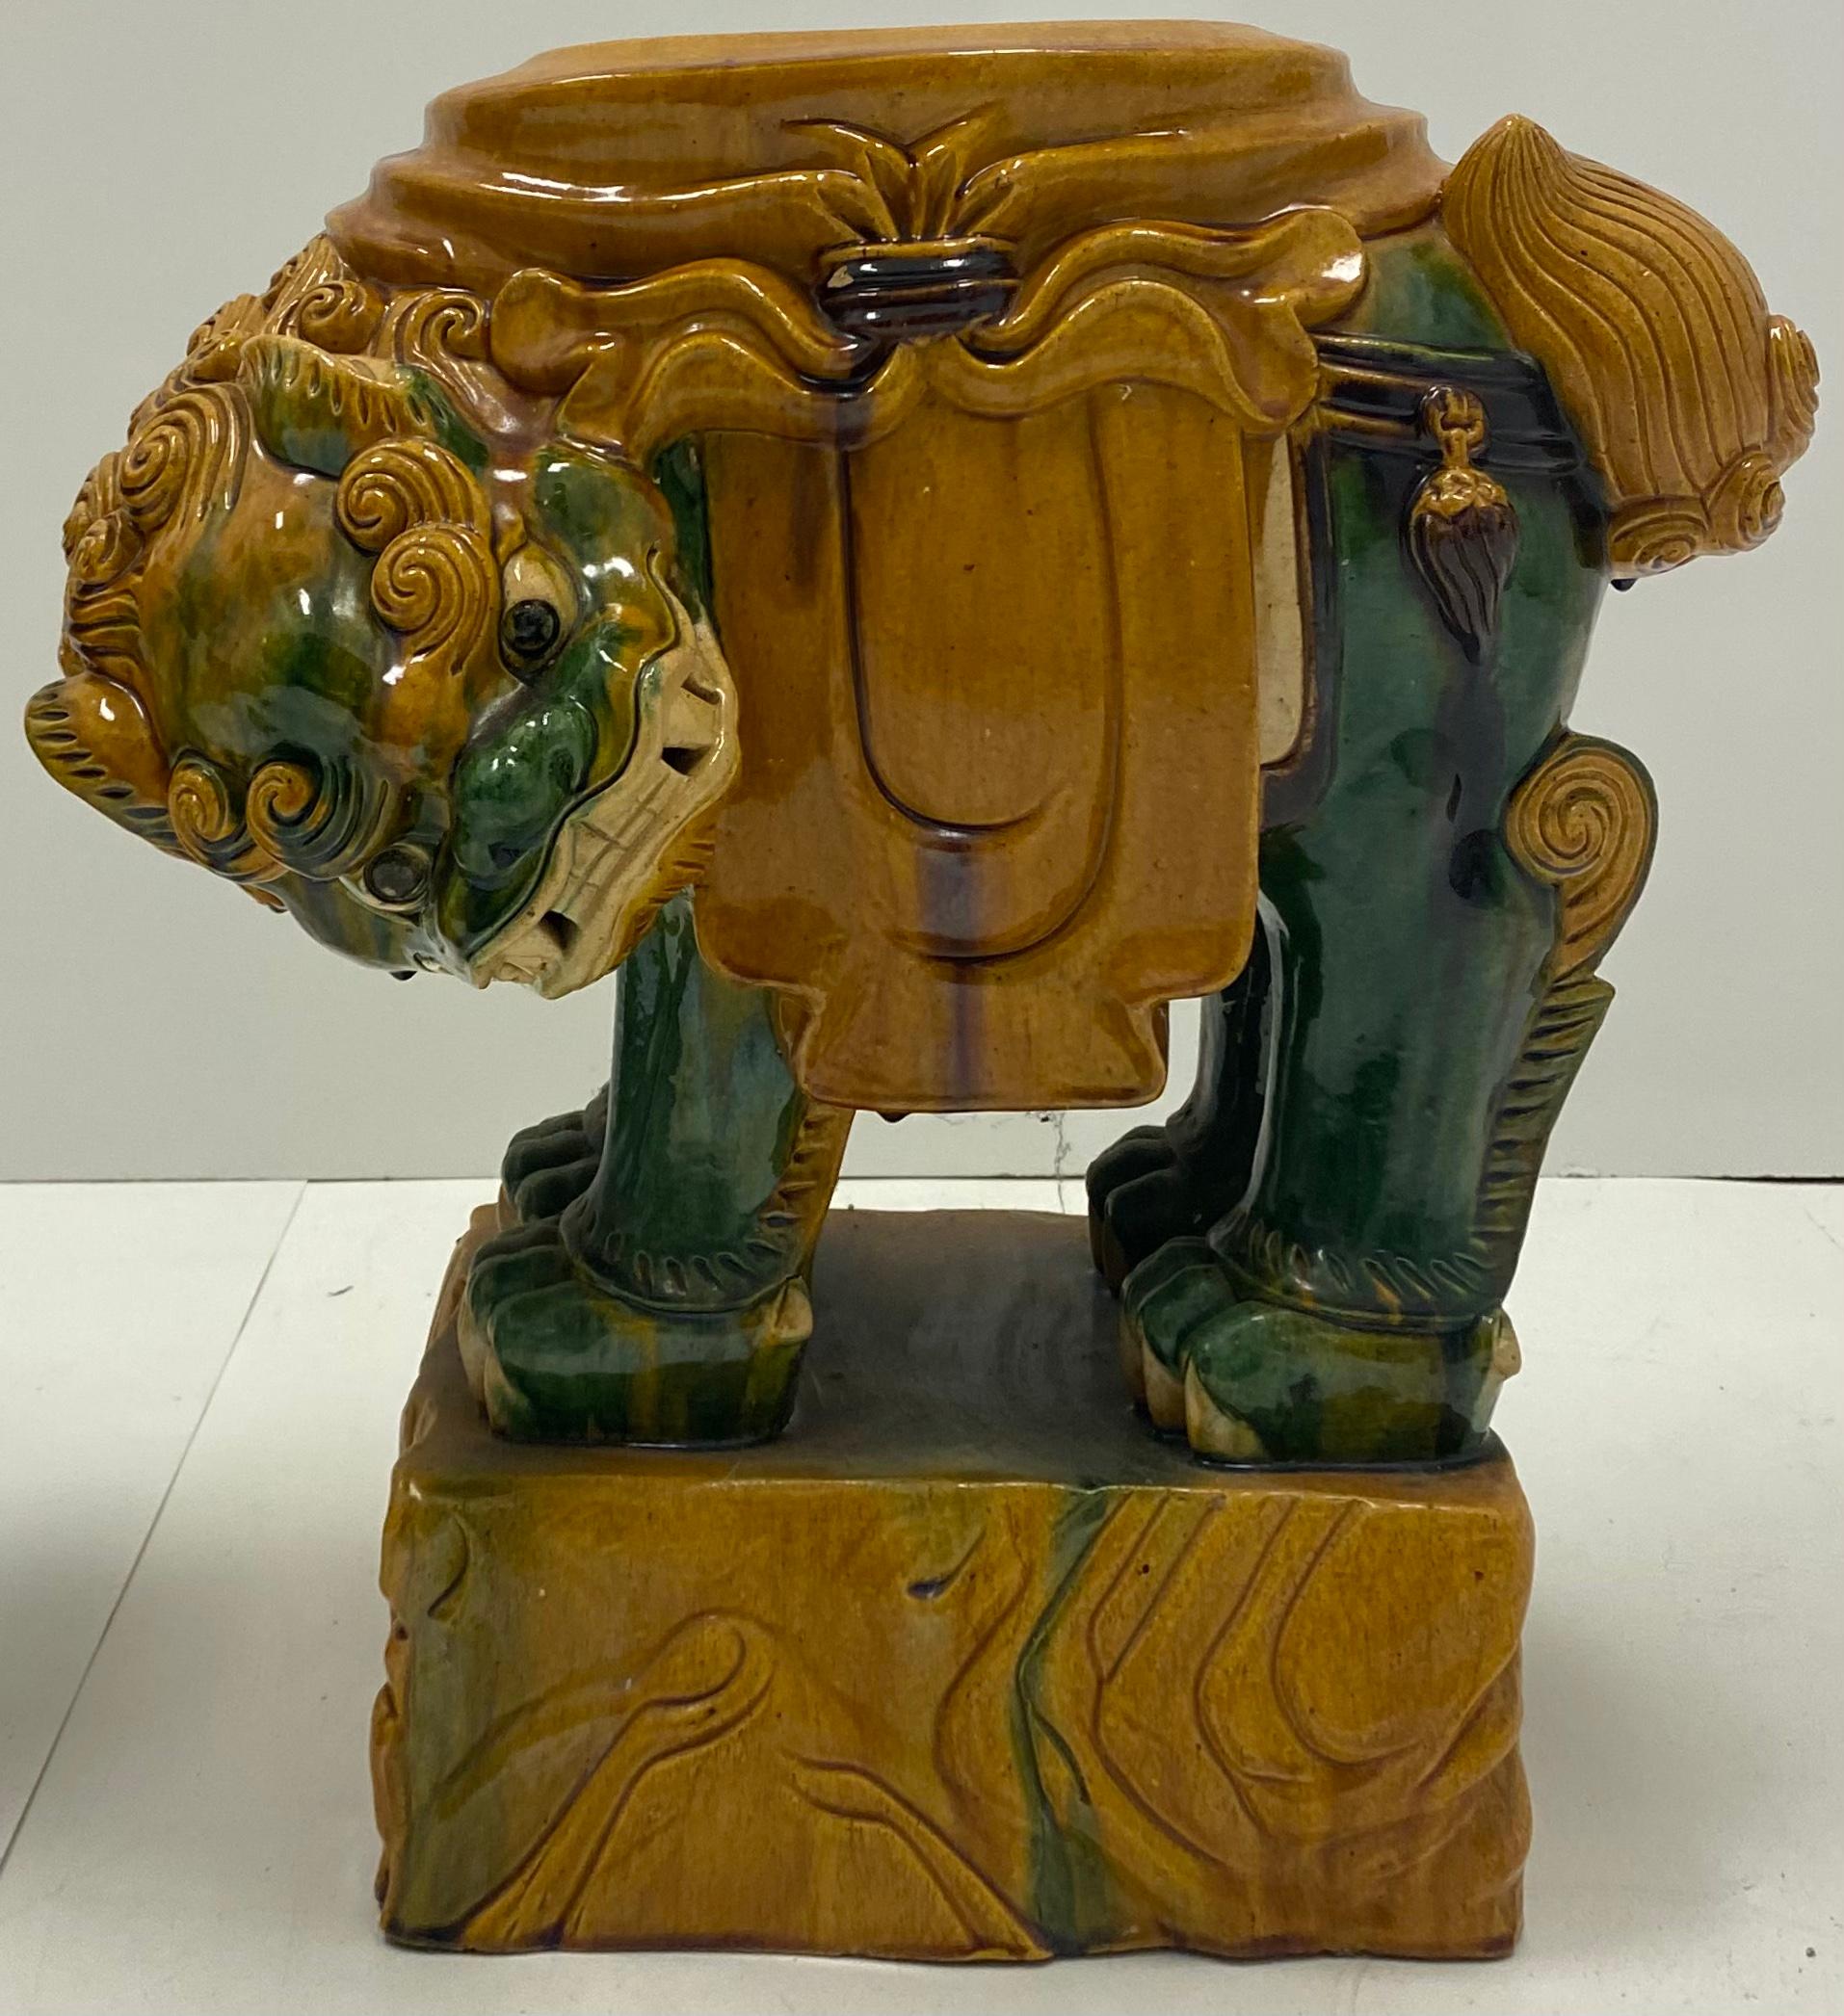 Midcentury Italian Terracotta Foo Dog Garden Seats, a Pair In Good Condition For Sale In Kennesaw, GA